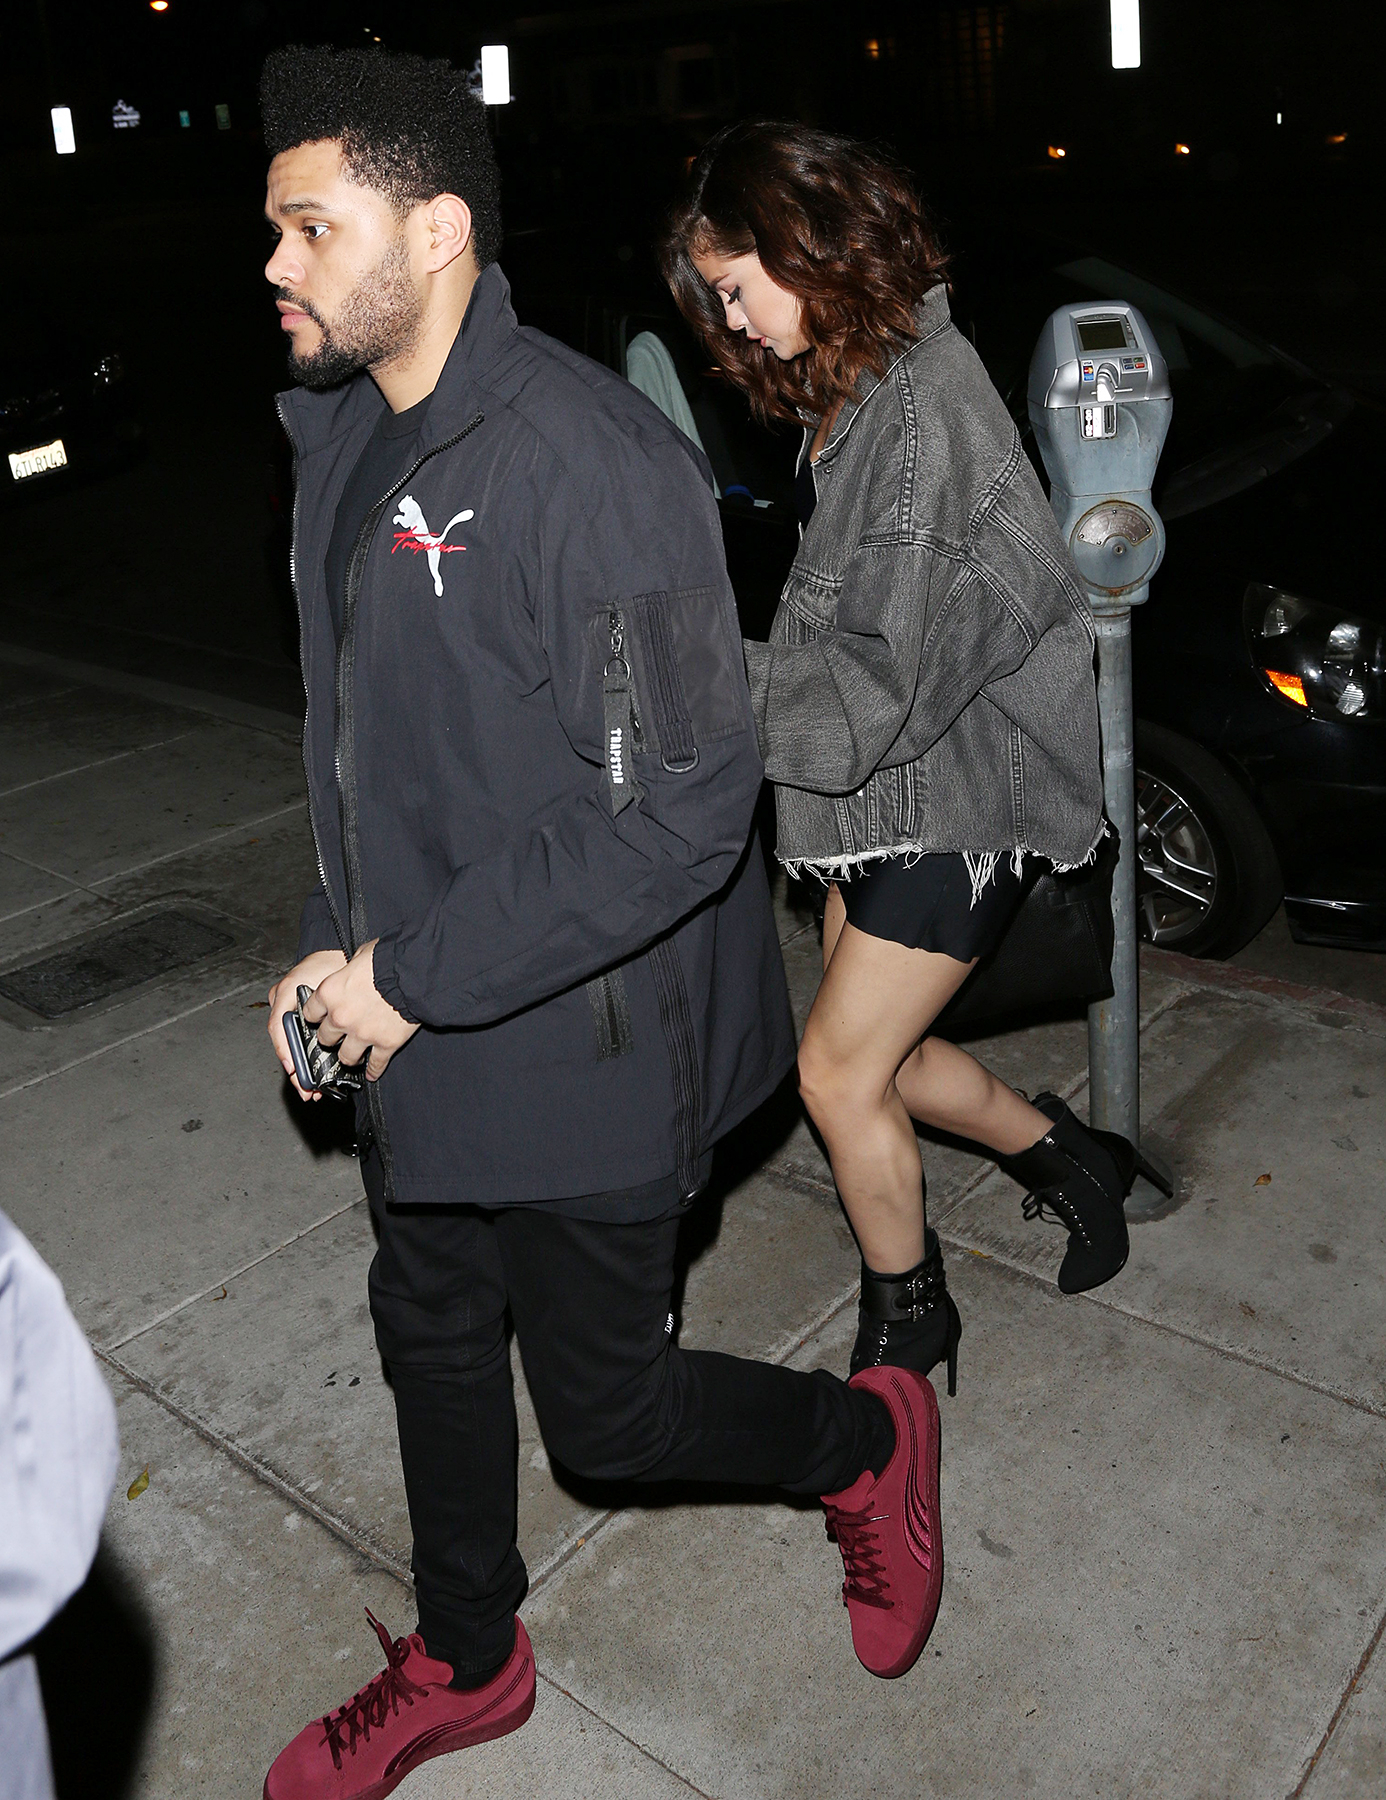 Selena Gomez Shows Off Toned Legs On Date Night With The Weeknd